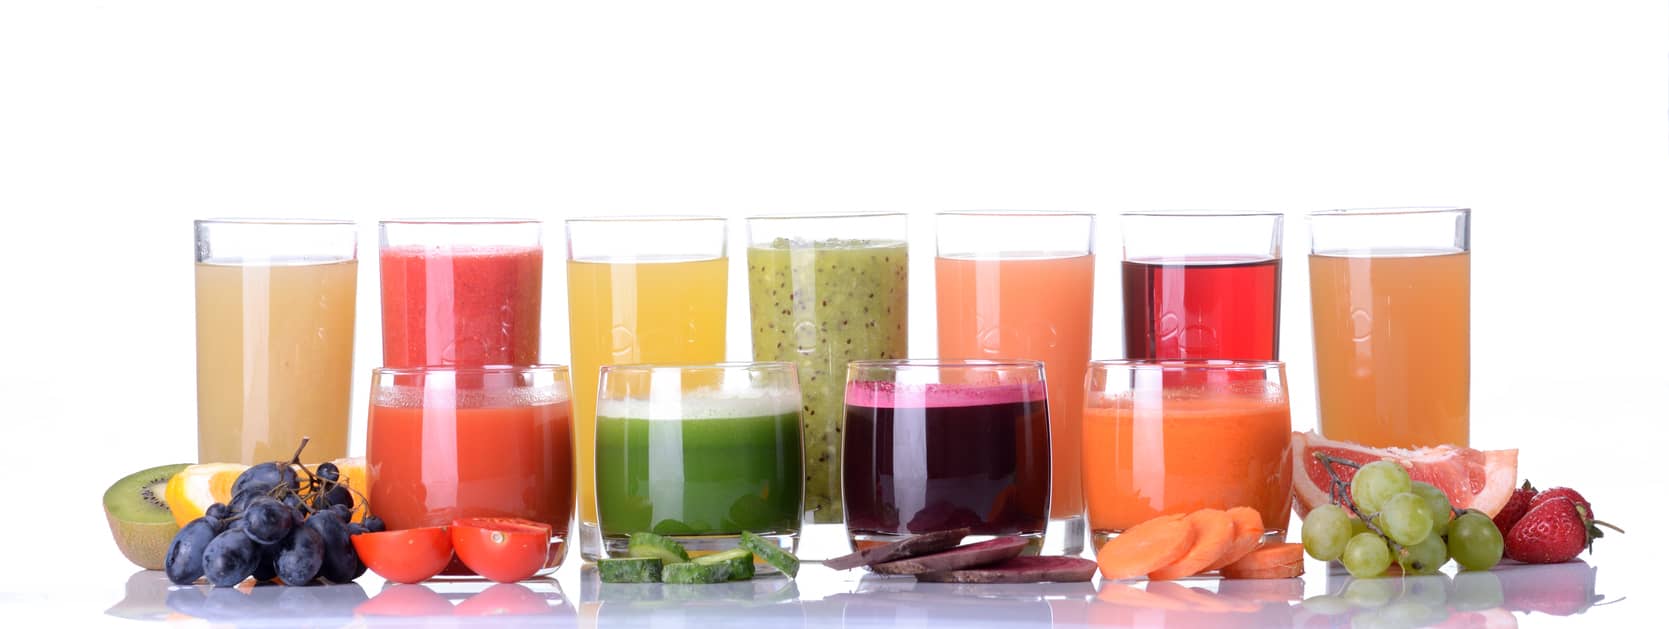 Juicing could contribute to dental caries, nutrient deficiencies and weight gain in children, adolescents and adults alike